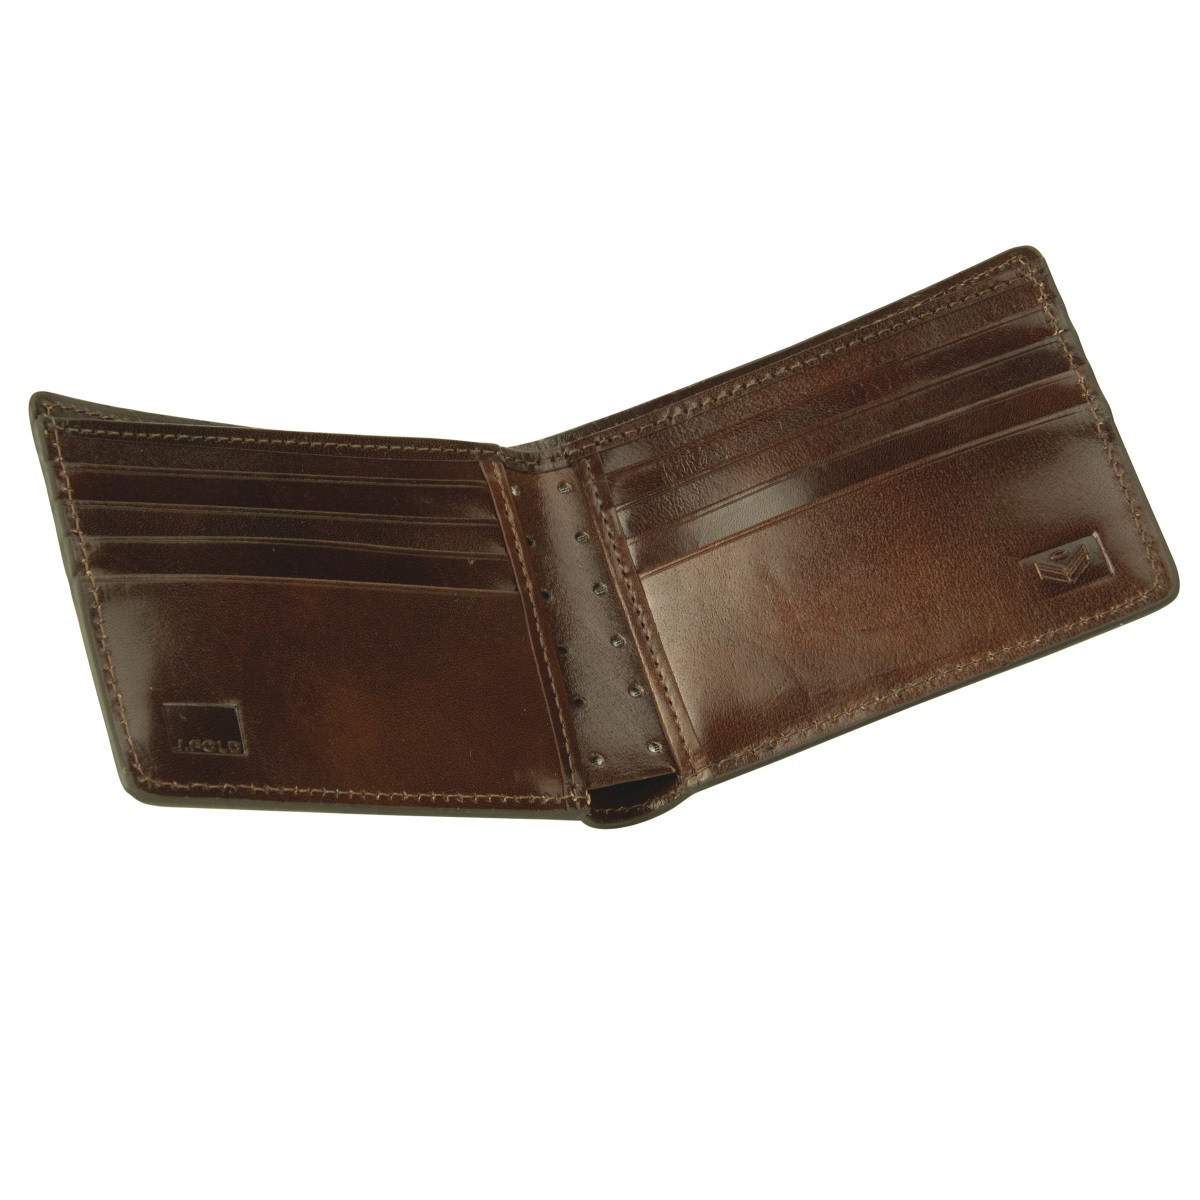 J.FOLD Thunderbird Leather Wallet - Brown/Ivory